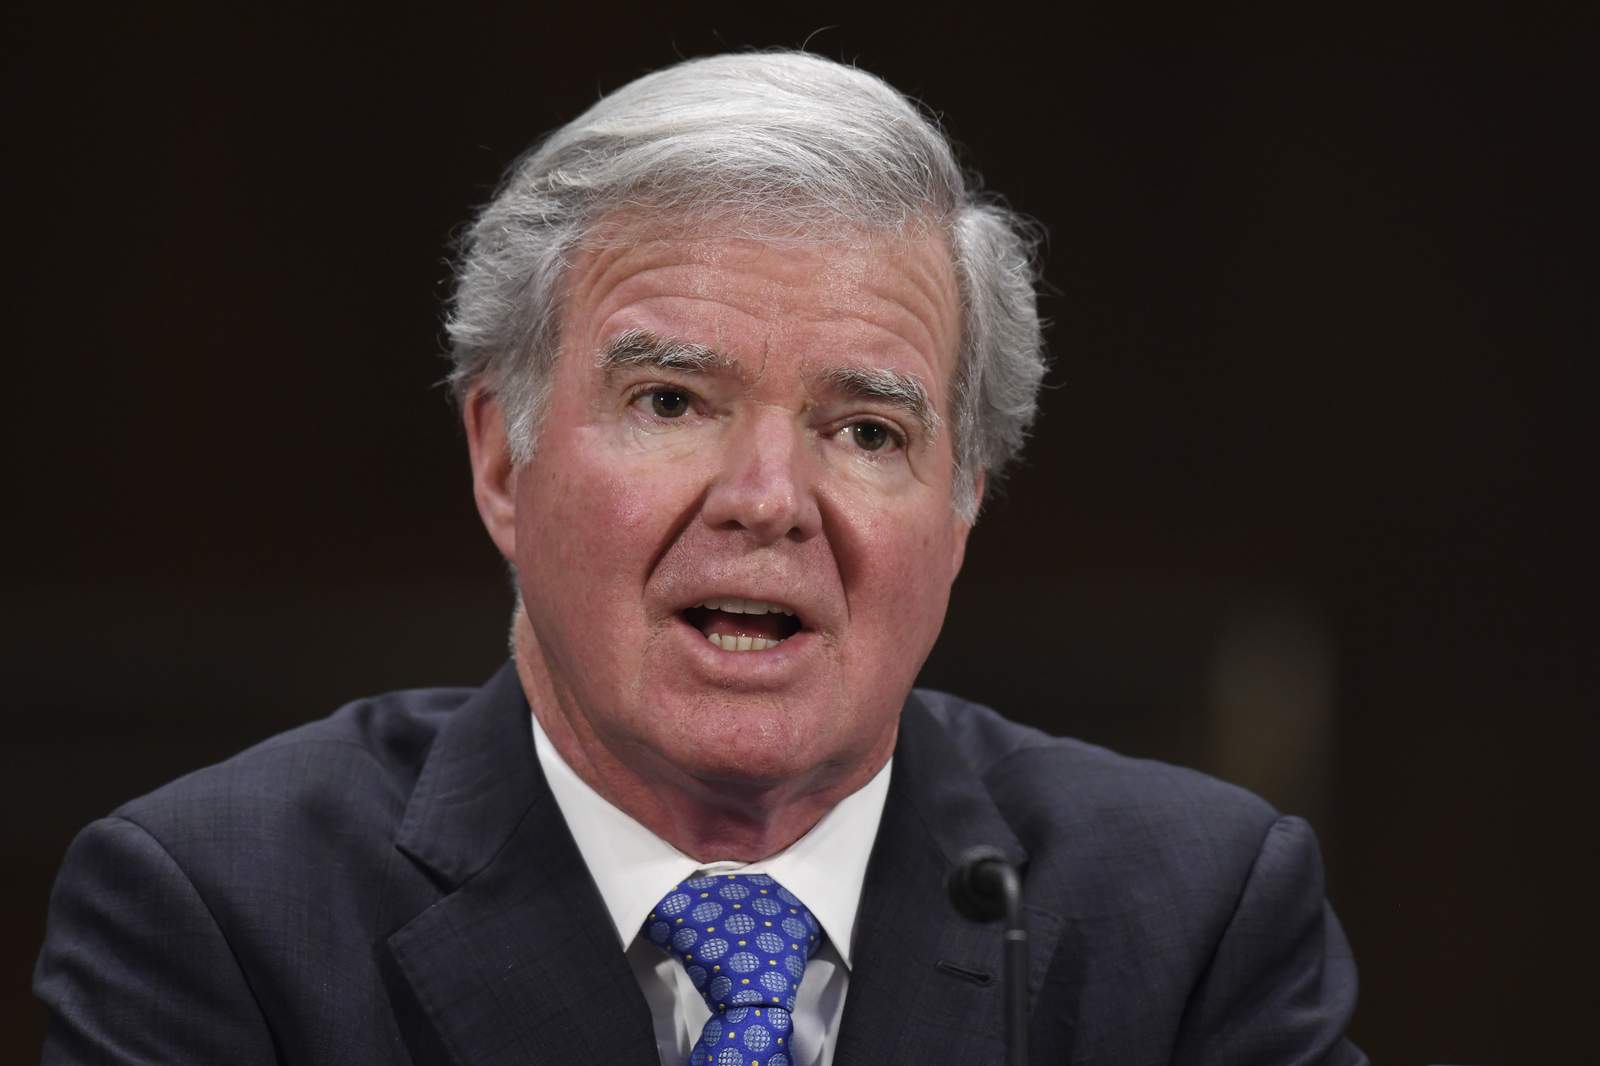 AP Interview: Emmert says poor communication led to inequity